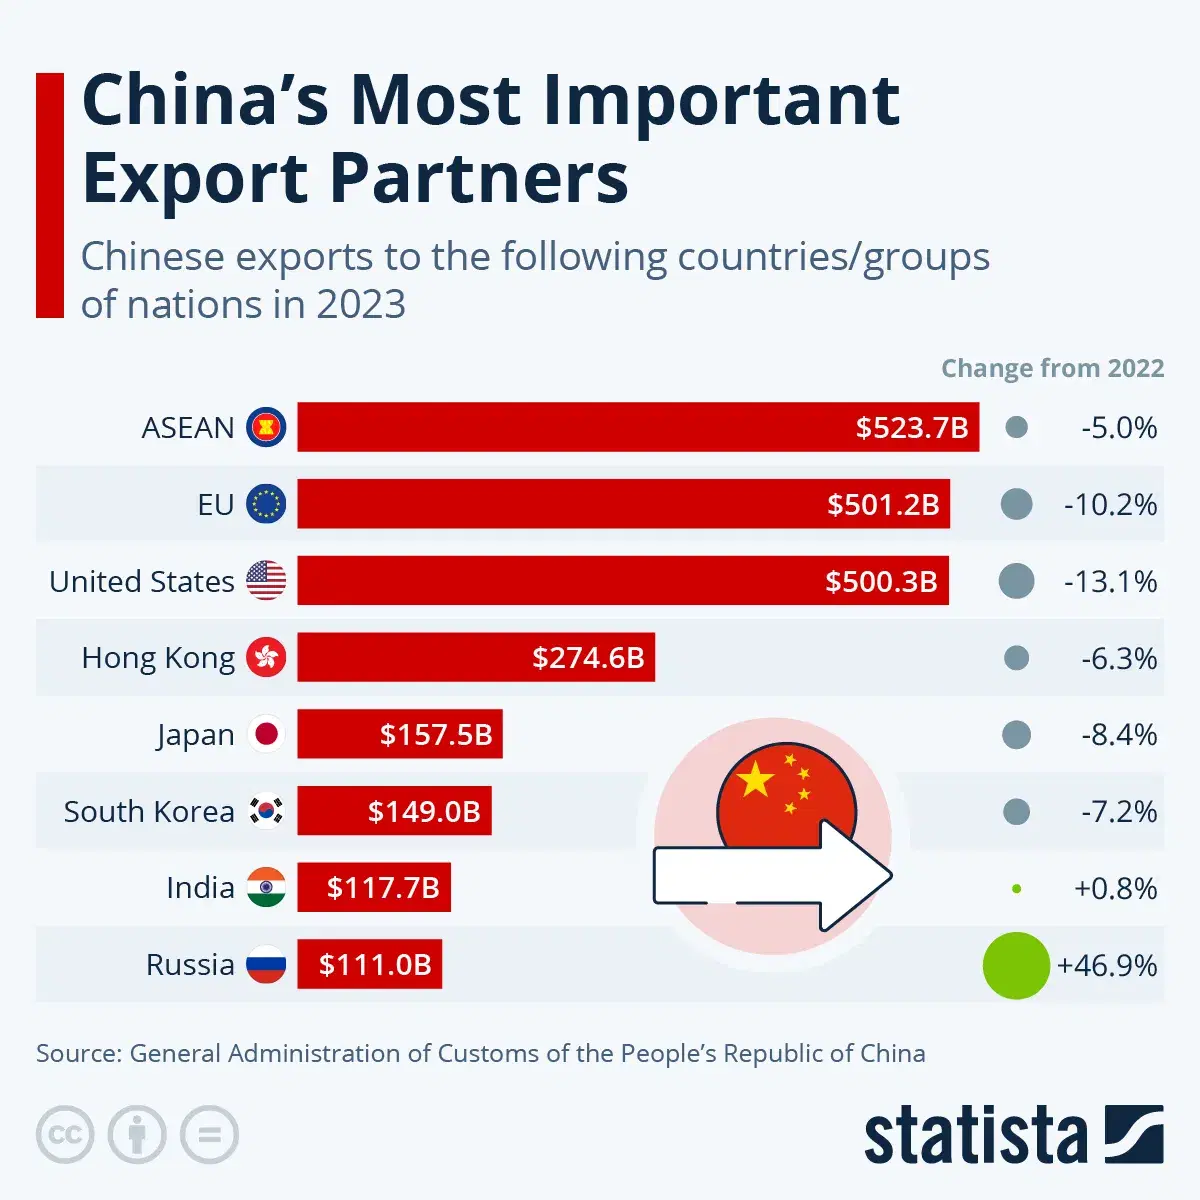 China's Most Important Export Partners